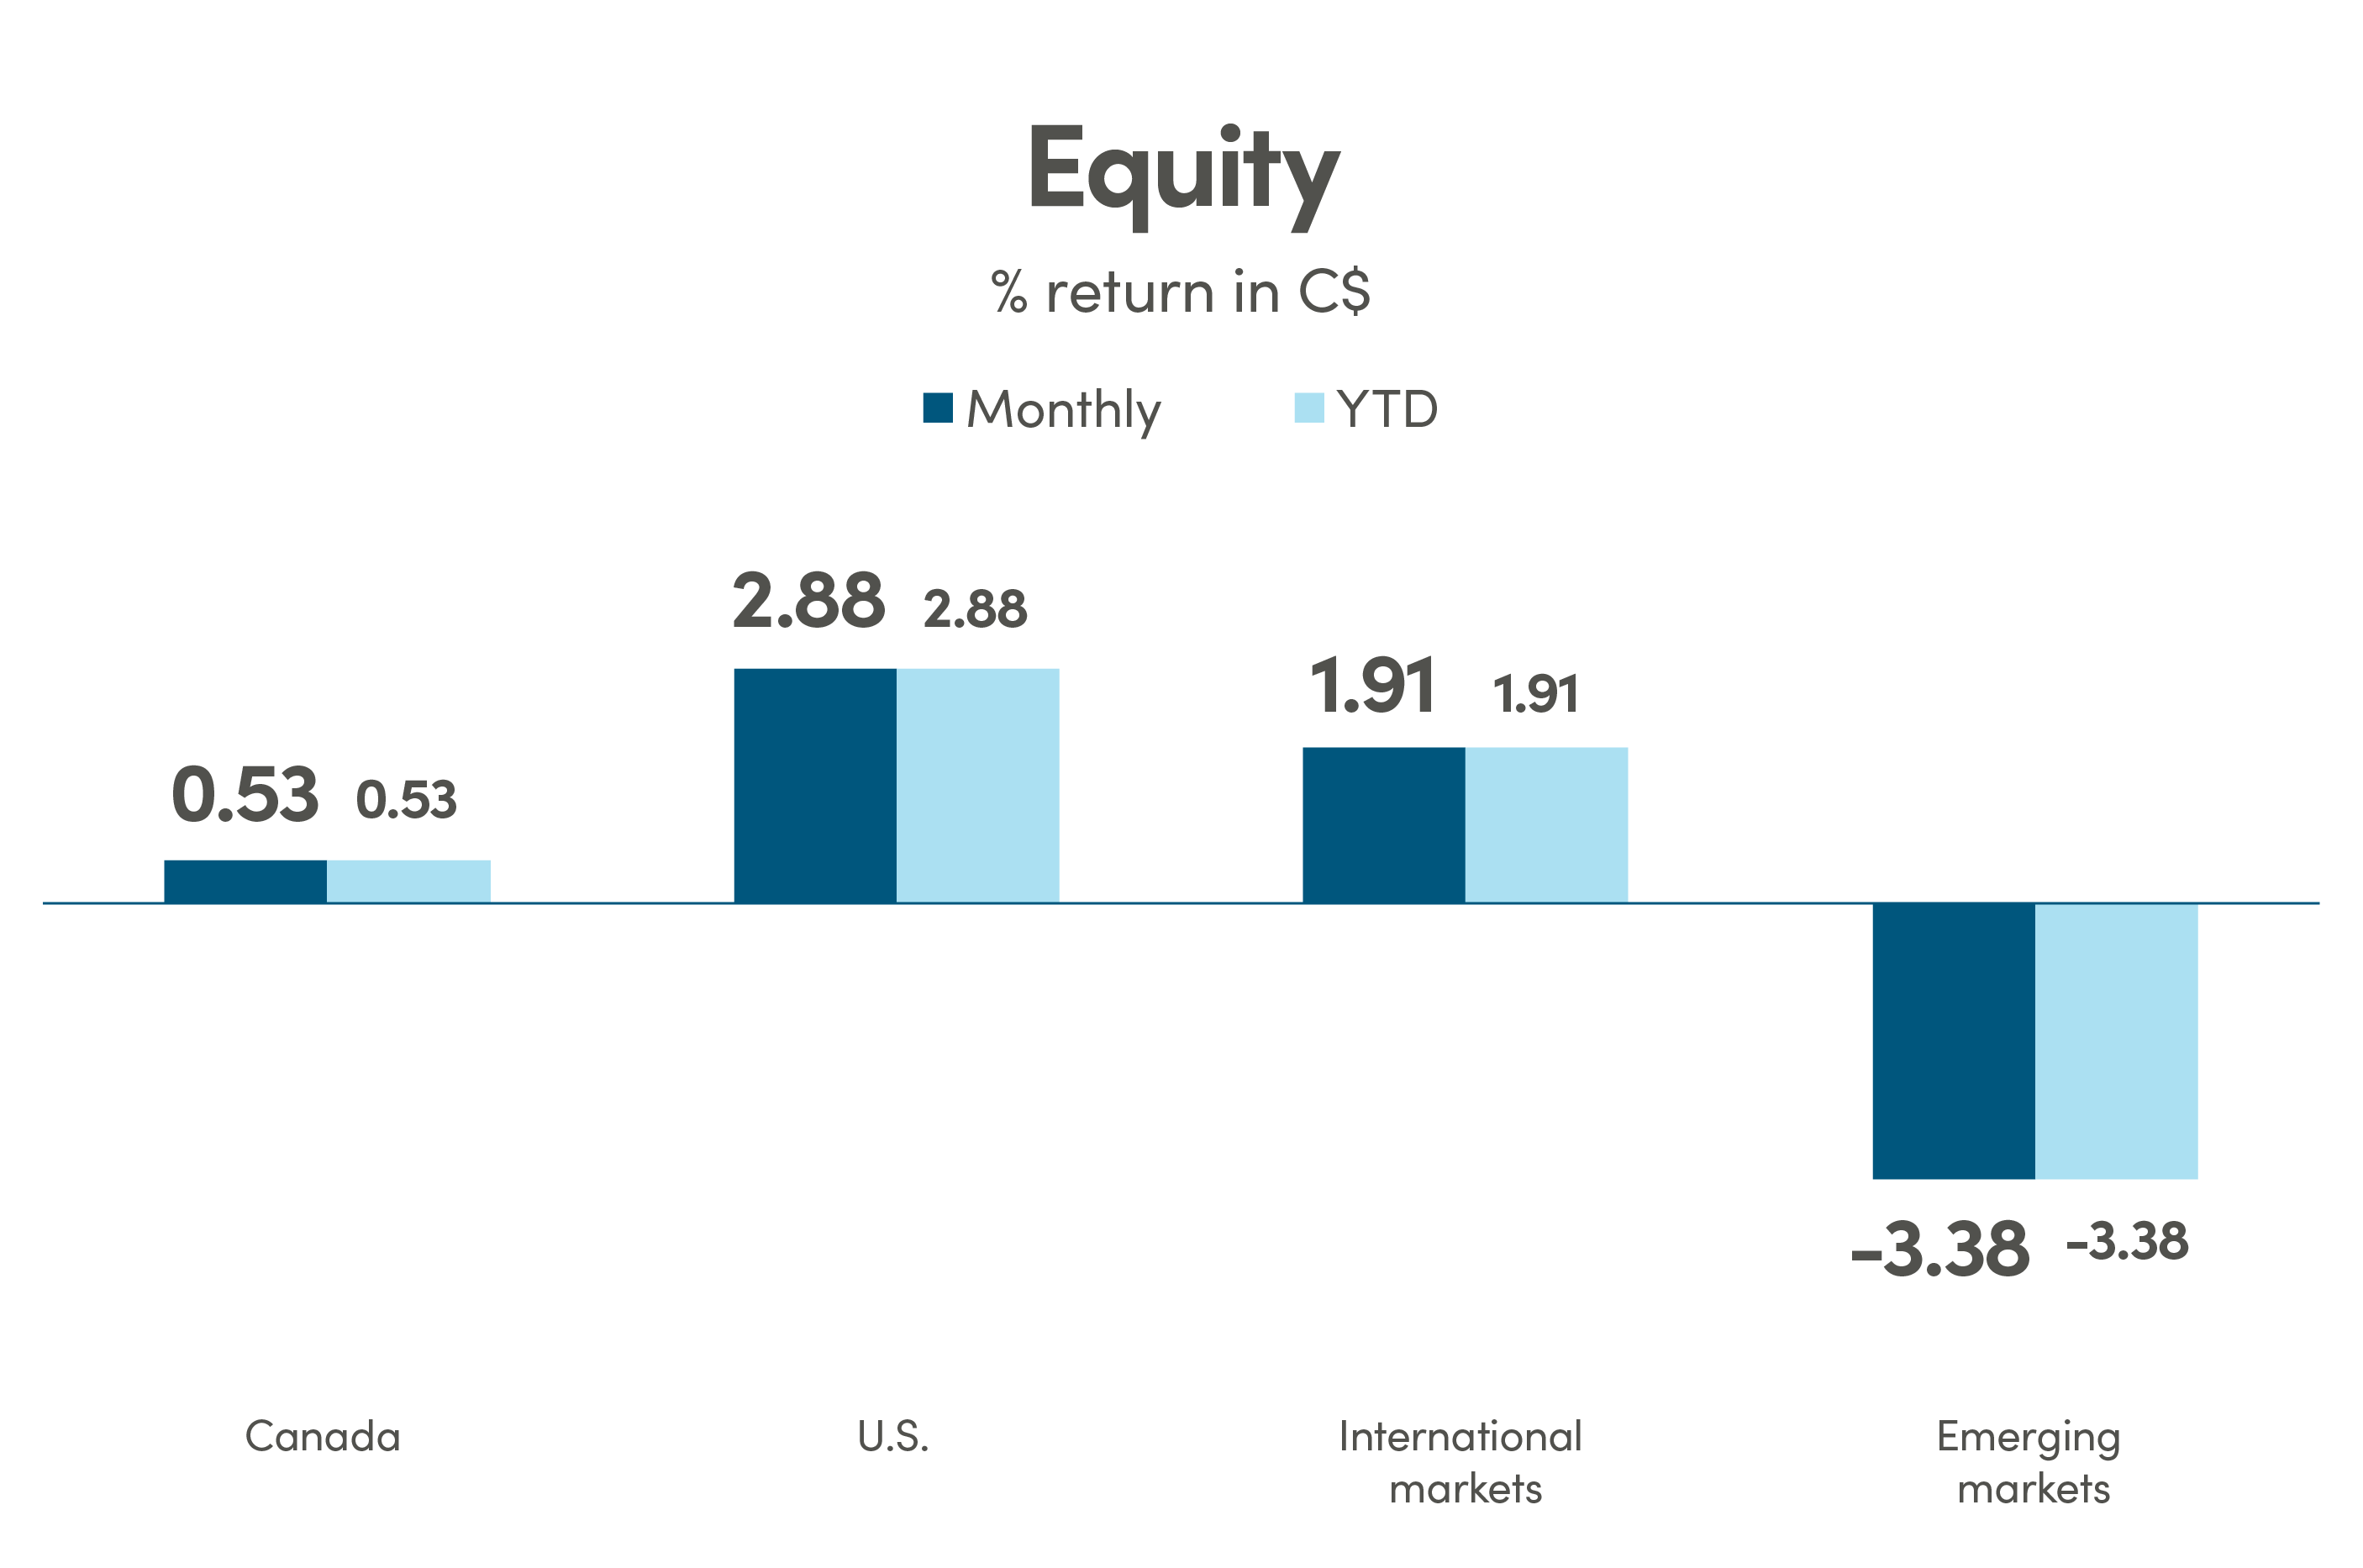 Bar graph showing % return in CAD (C$) for equity. Canada monthly return and YTD is 0.53%. US monthly return and YTD is 2.88%. International markets monthly return and YTD is 1.91%. Emerging markets monthly return and YTD is -3.38%